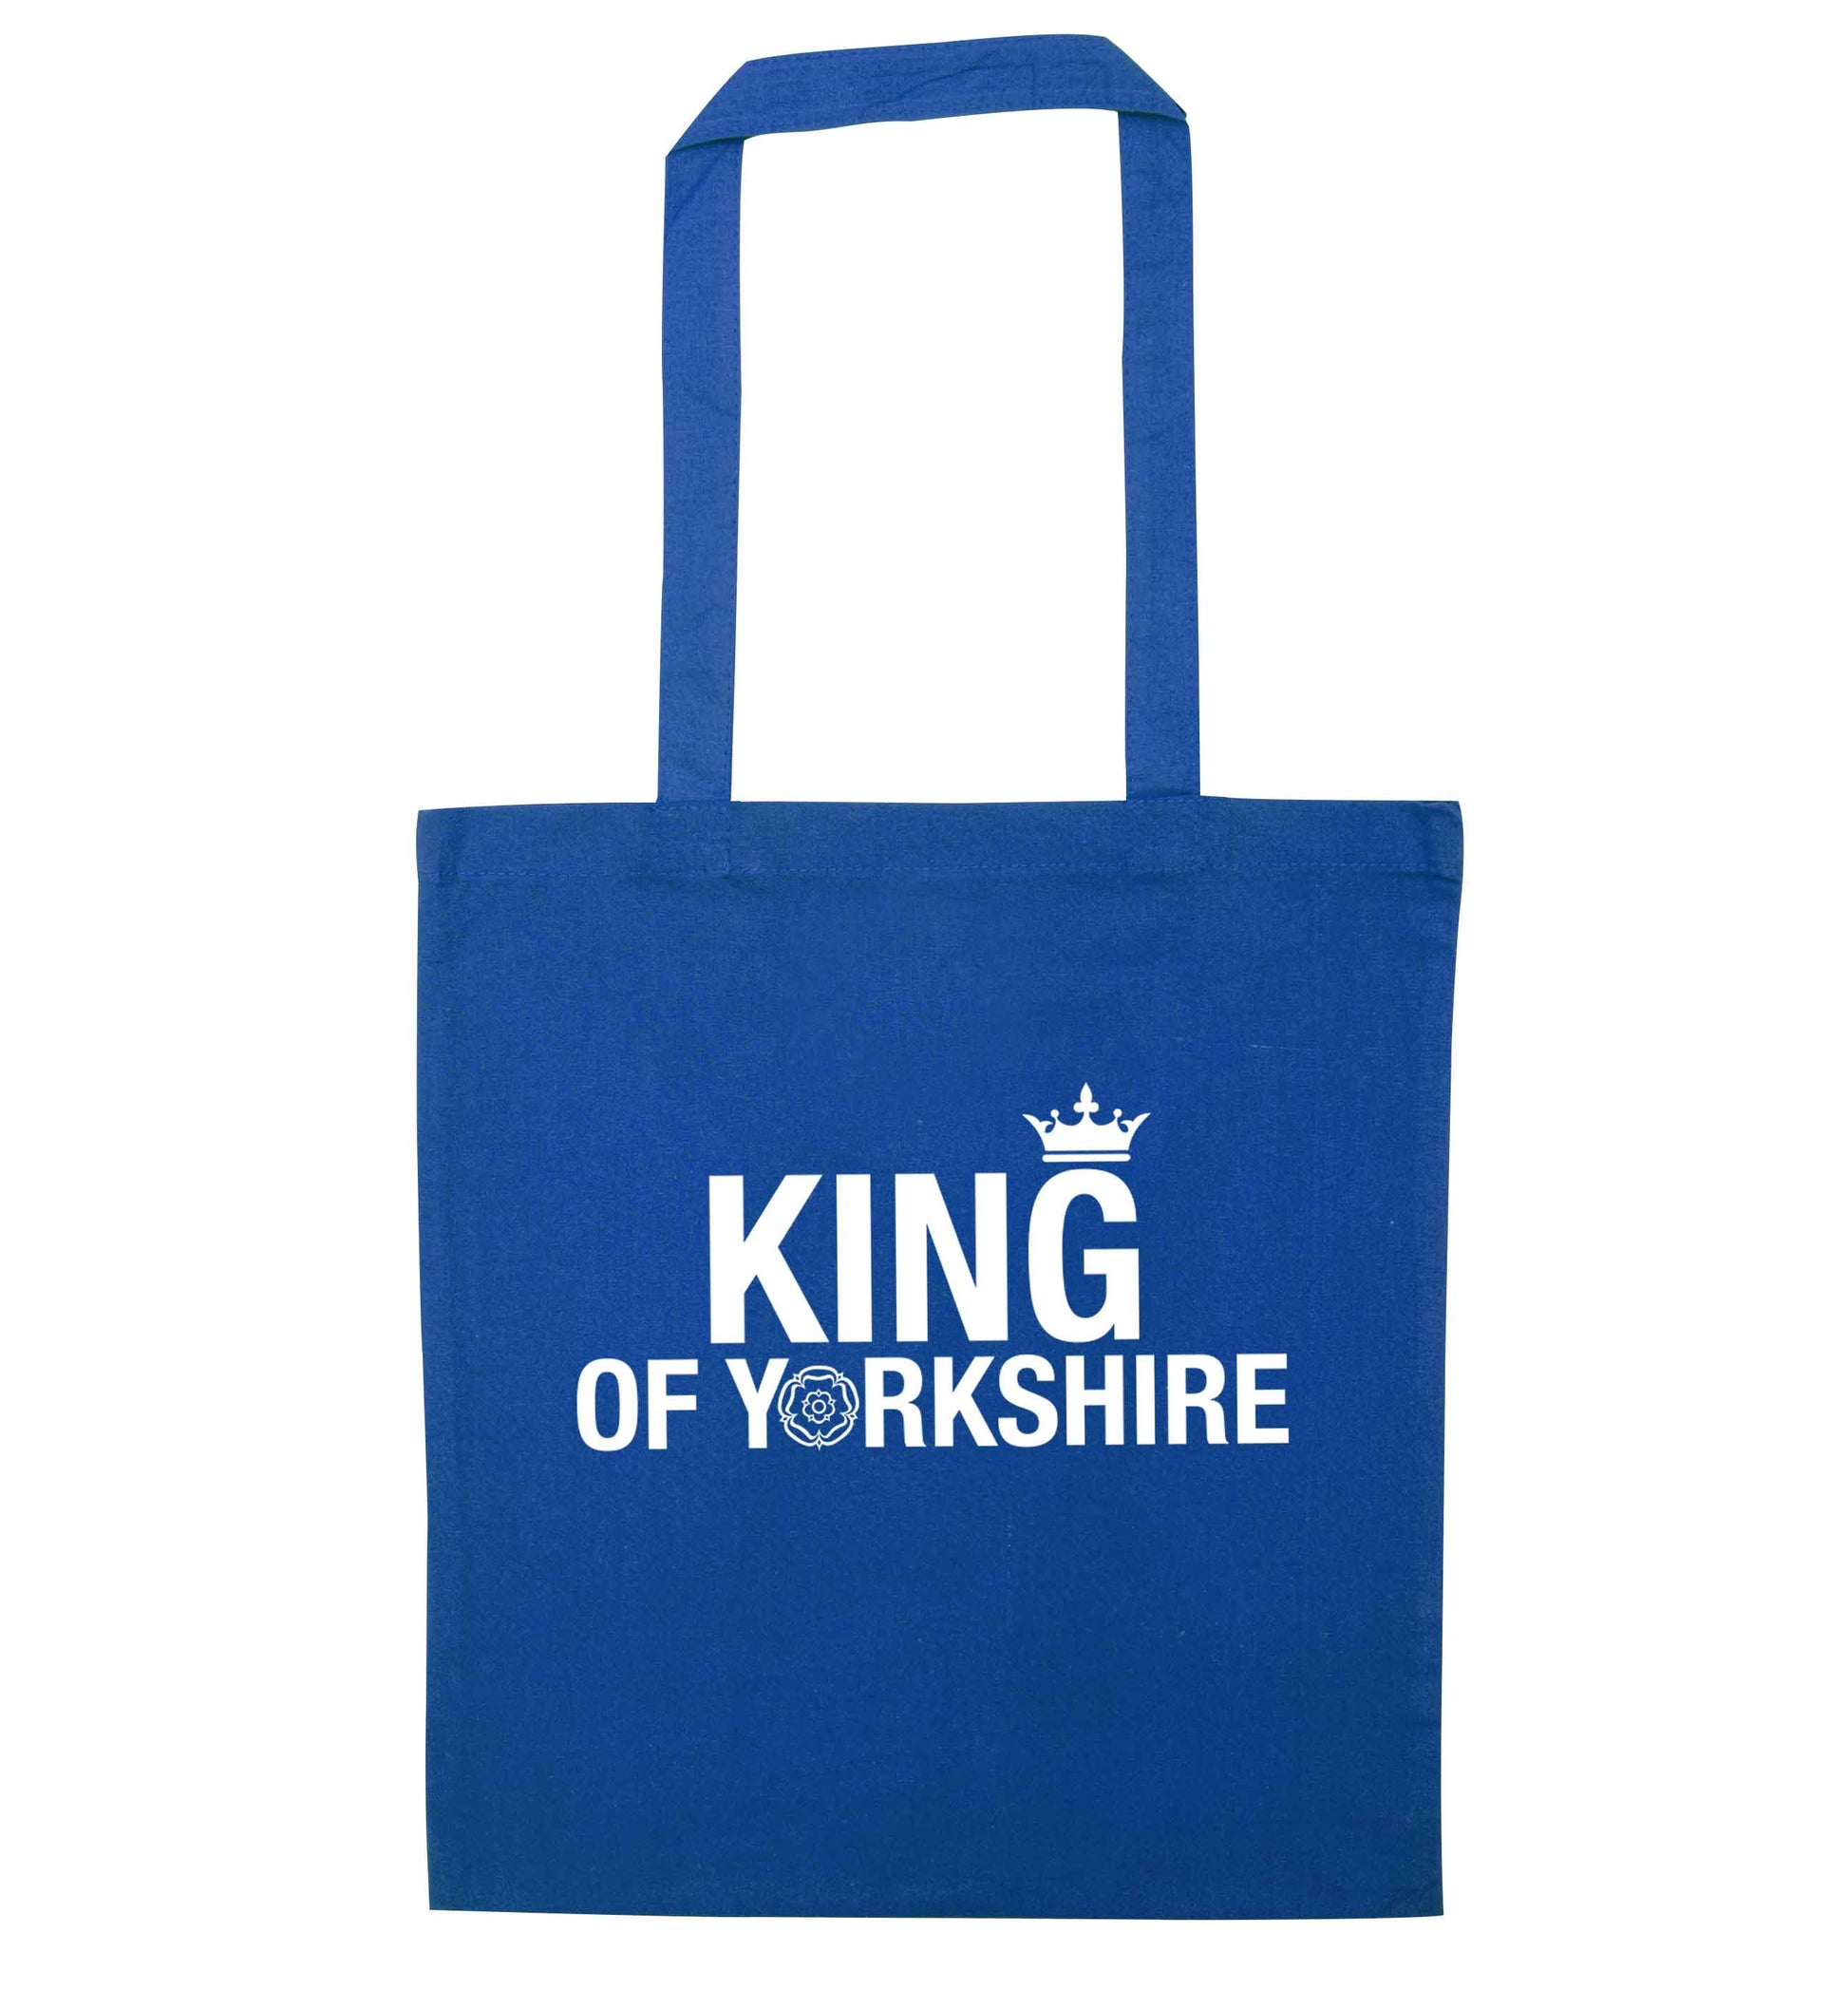 King of Yorkshire blue tote bag